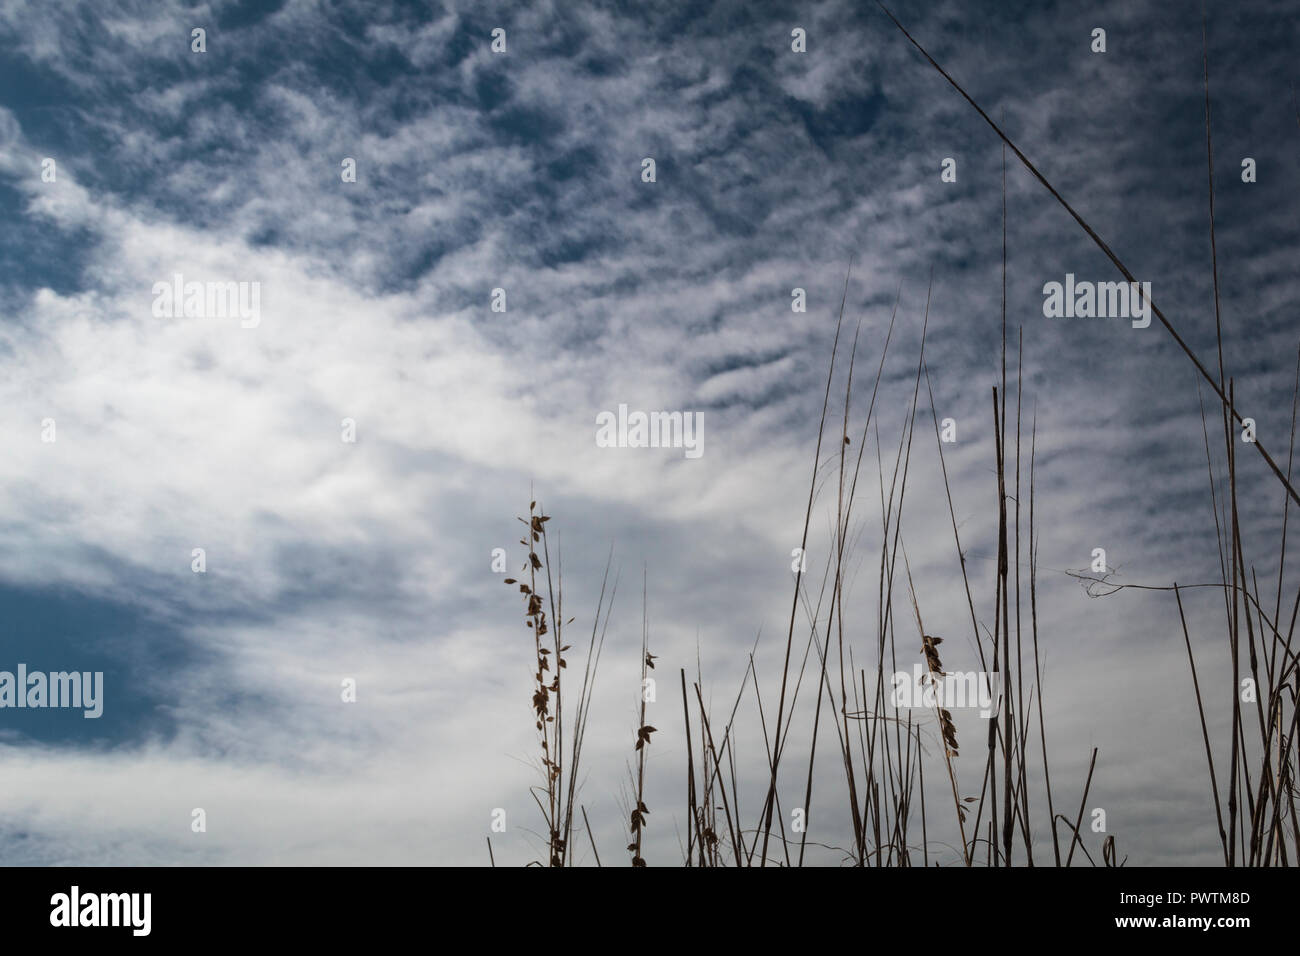 Cirrus and cumulus cloud formation, central Florida, USA Stock Photo